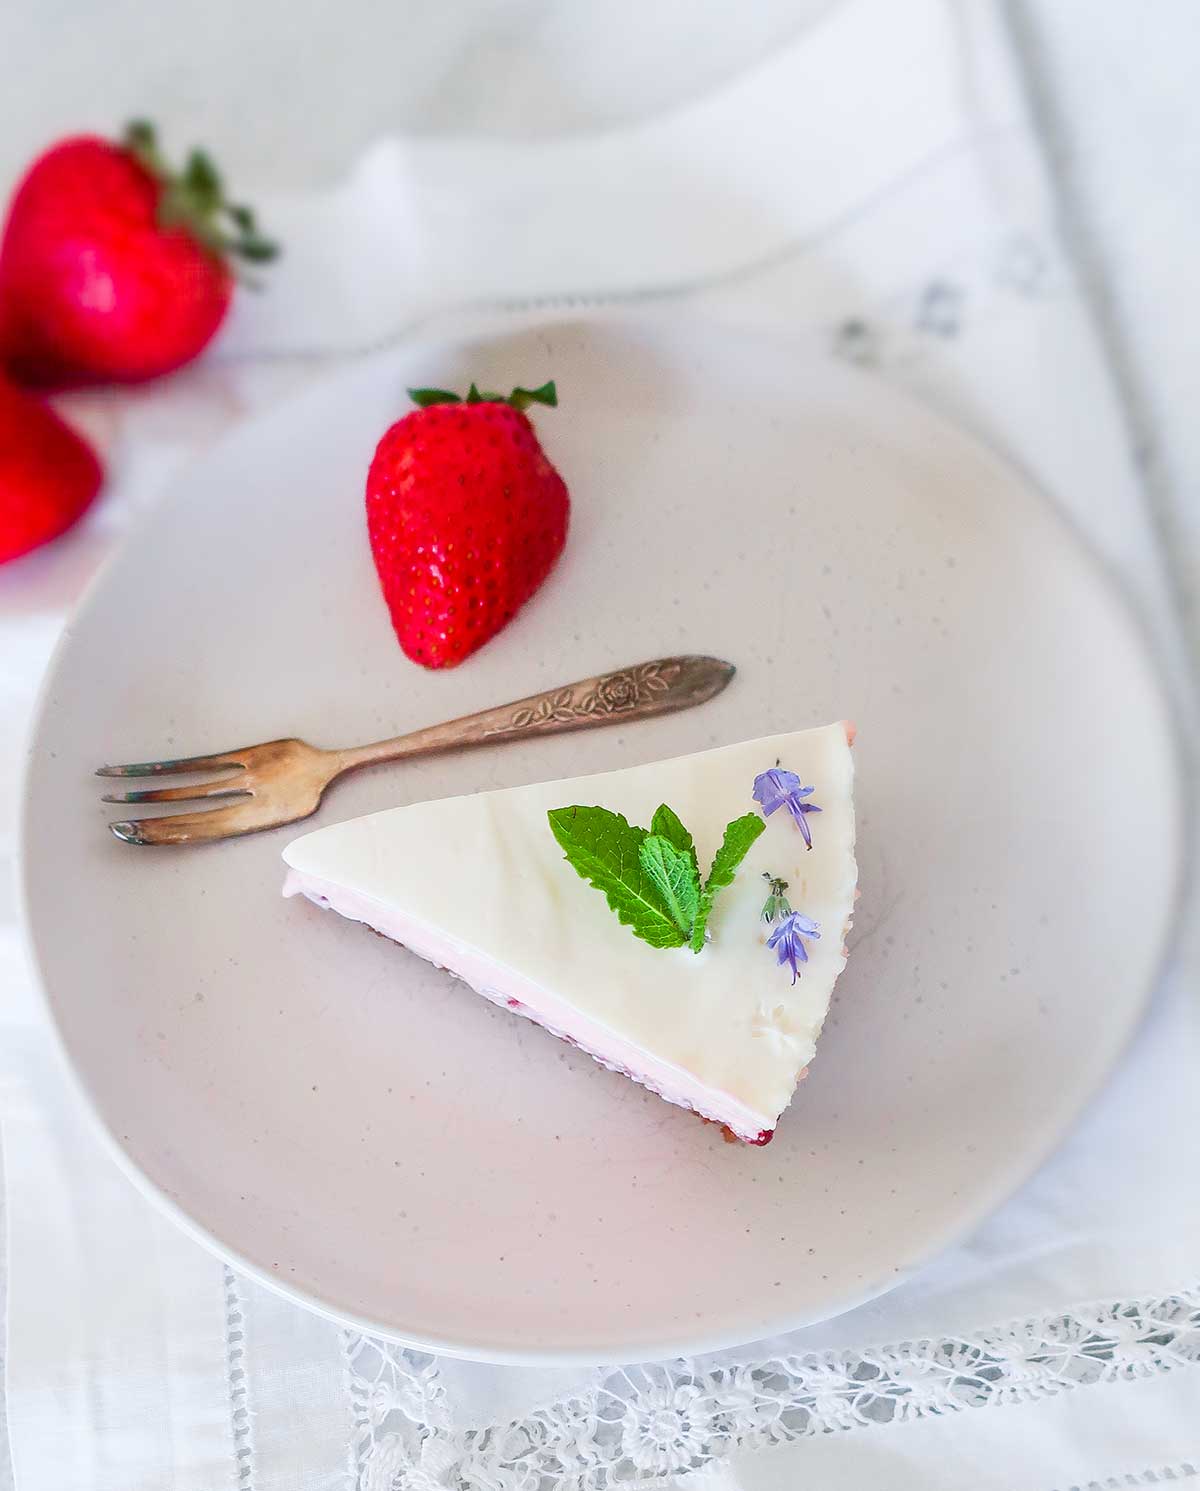 slice of cheesecake with fresh strawberries on a plate